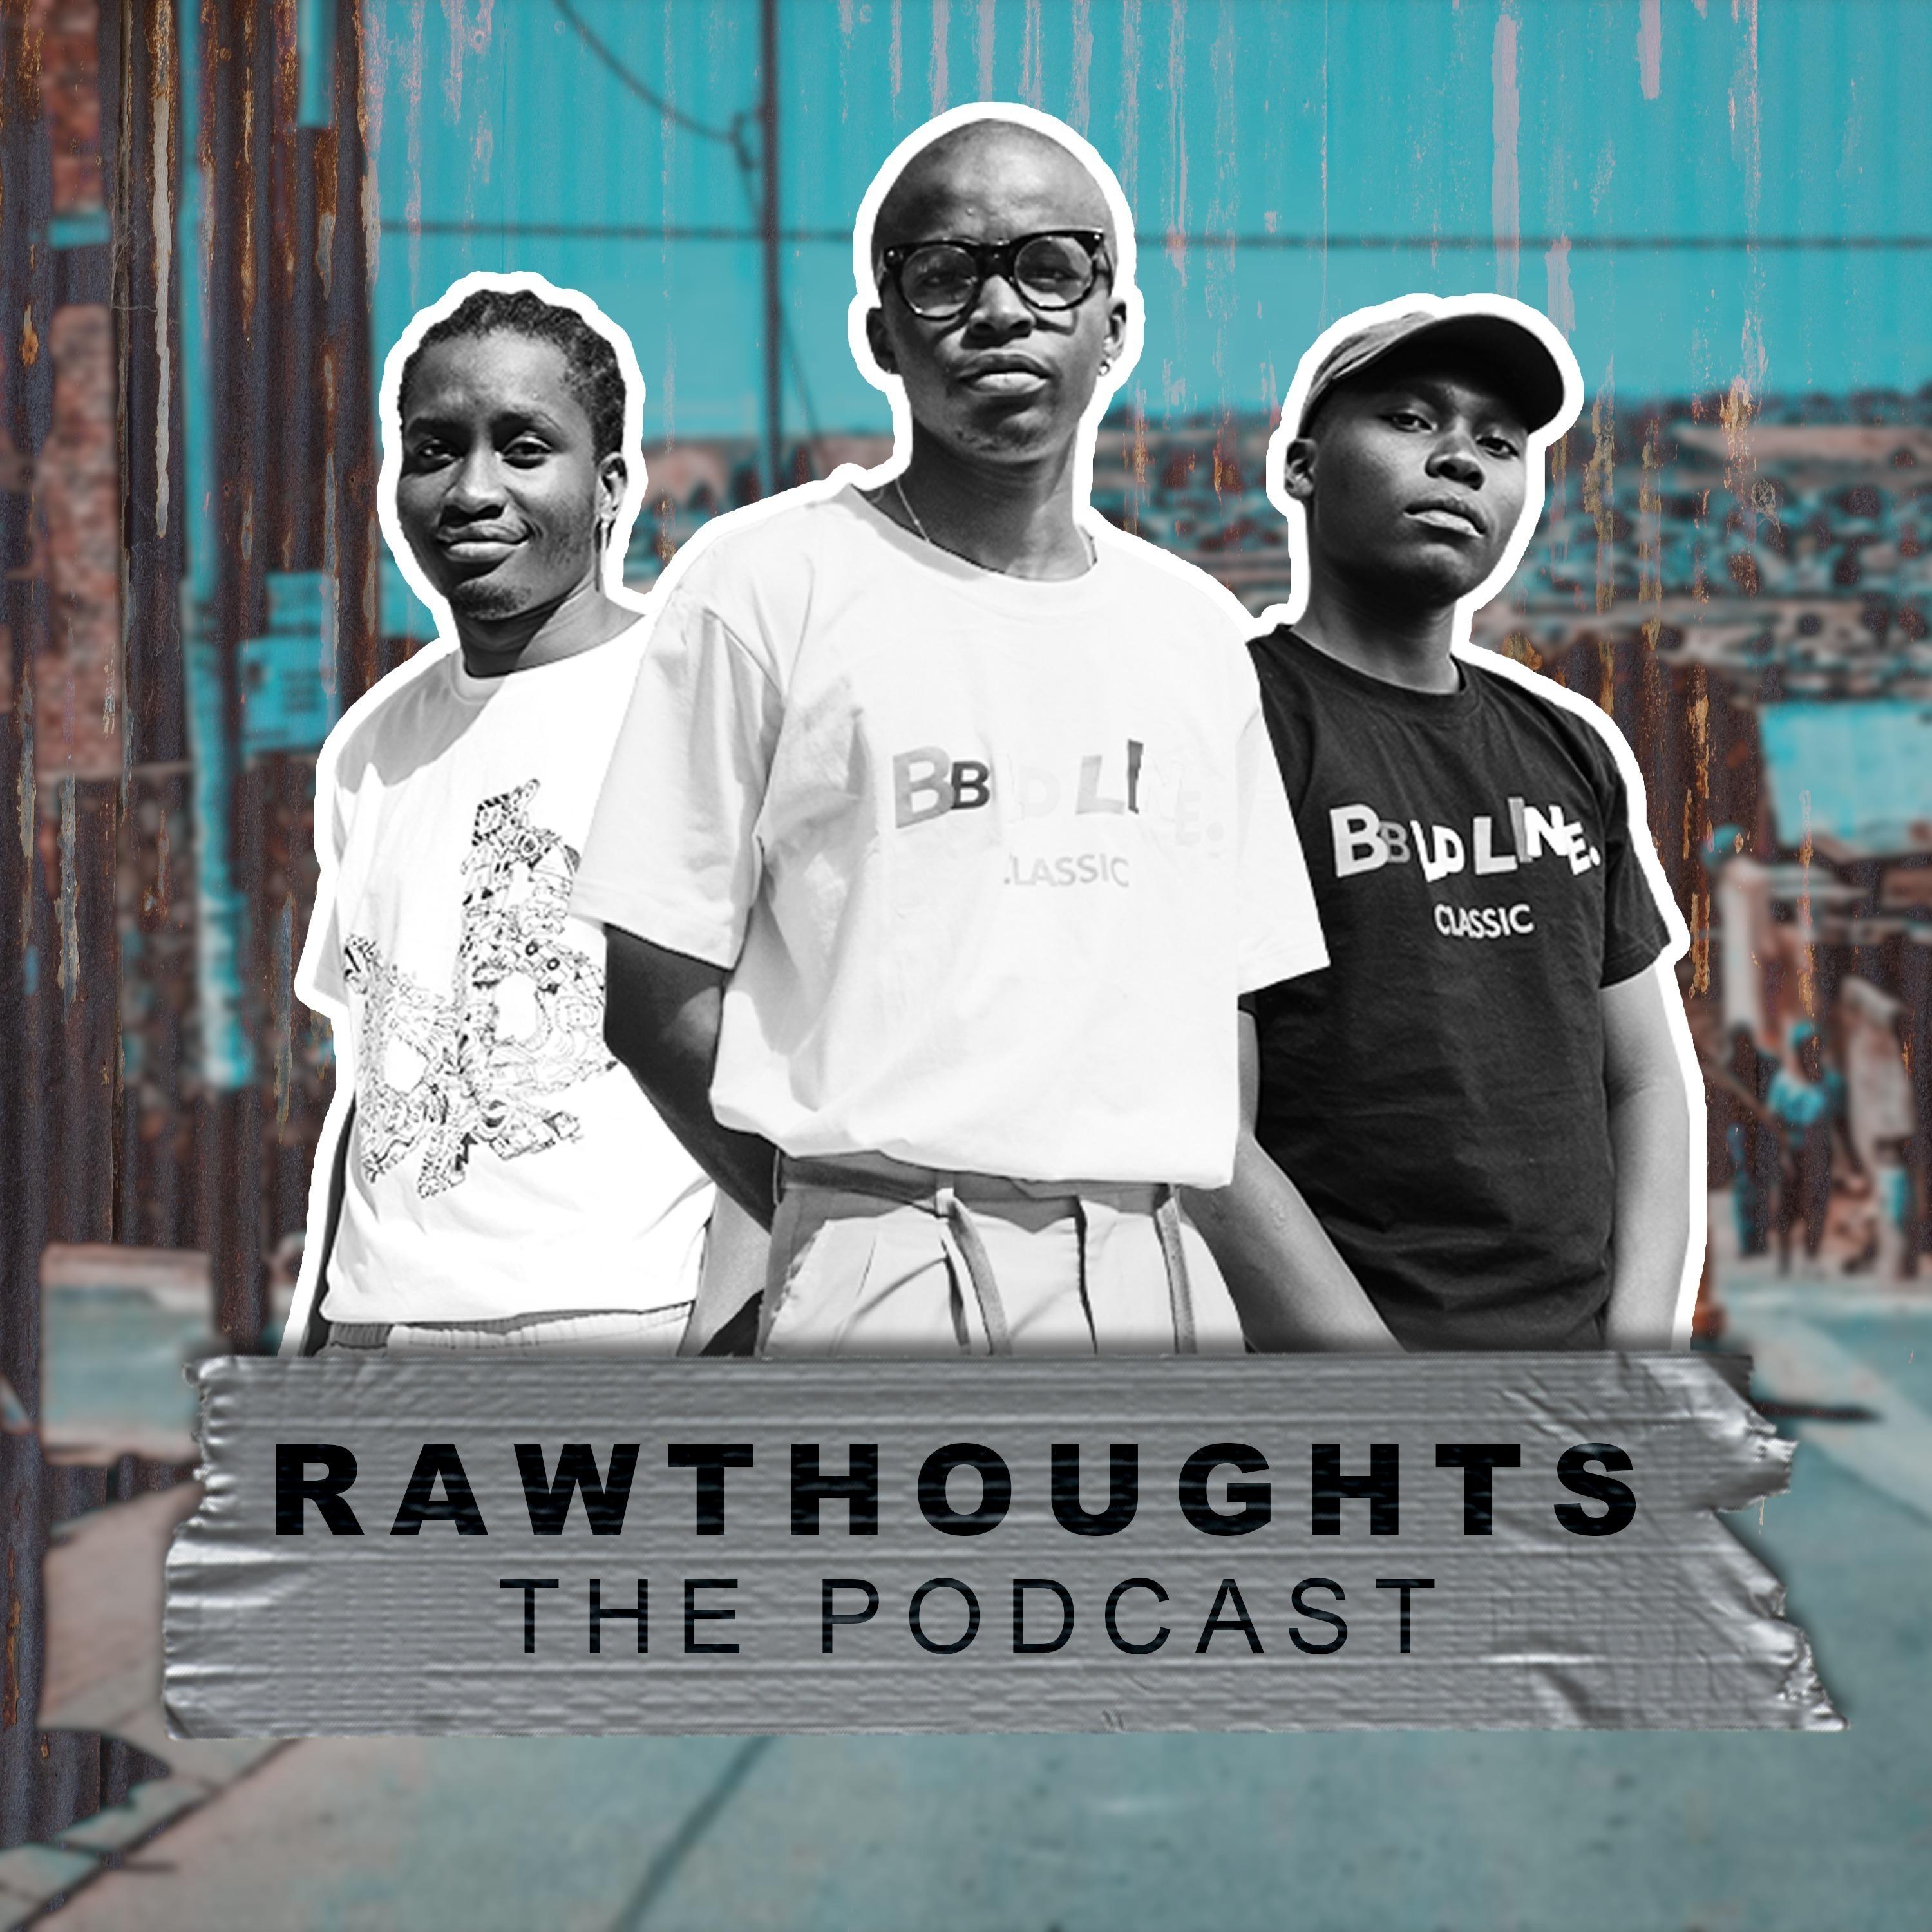 RawThoughts The Podcast